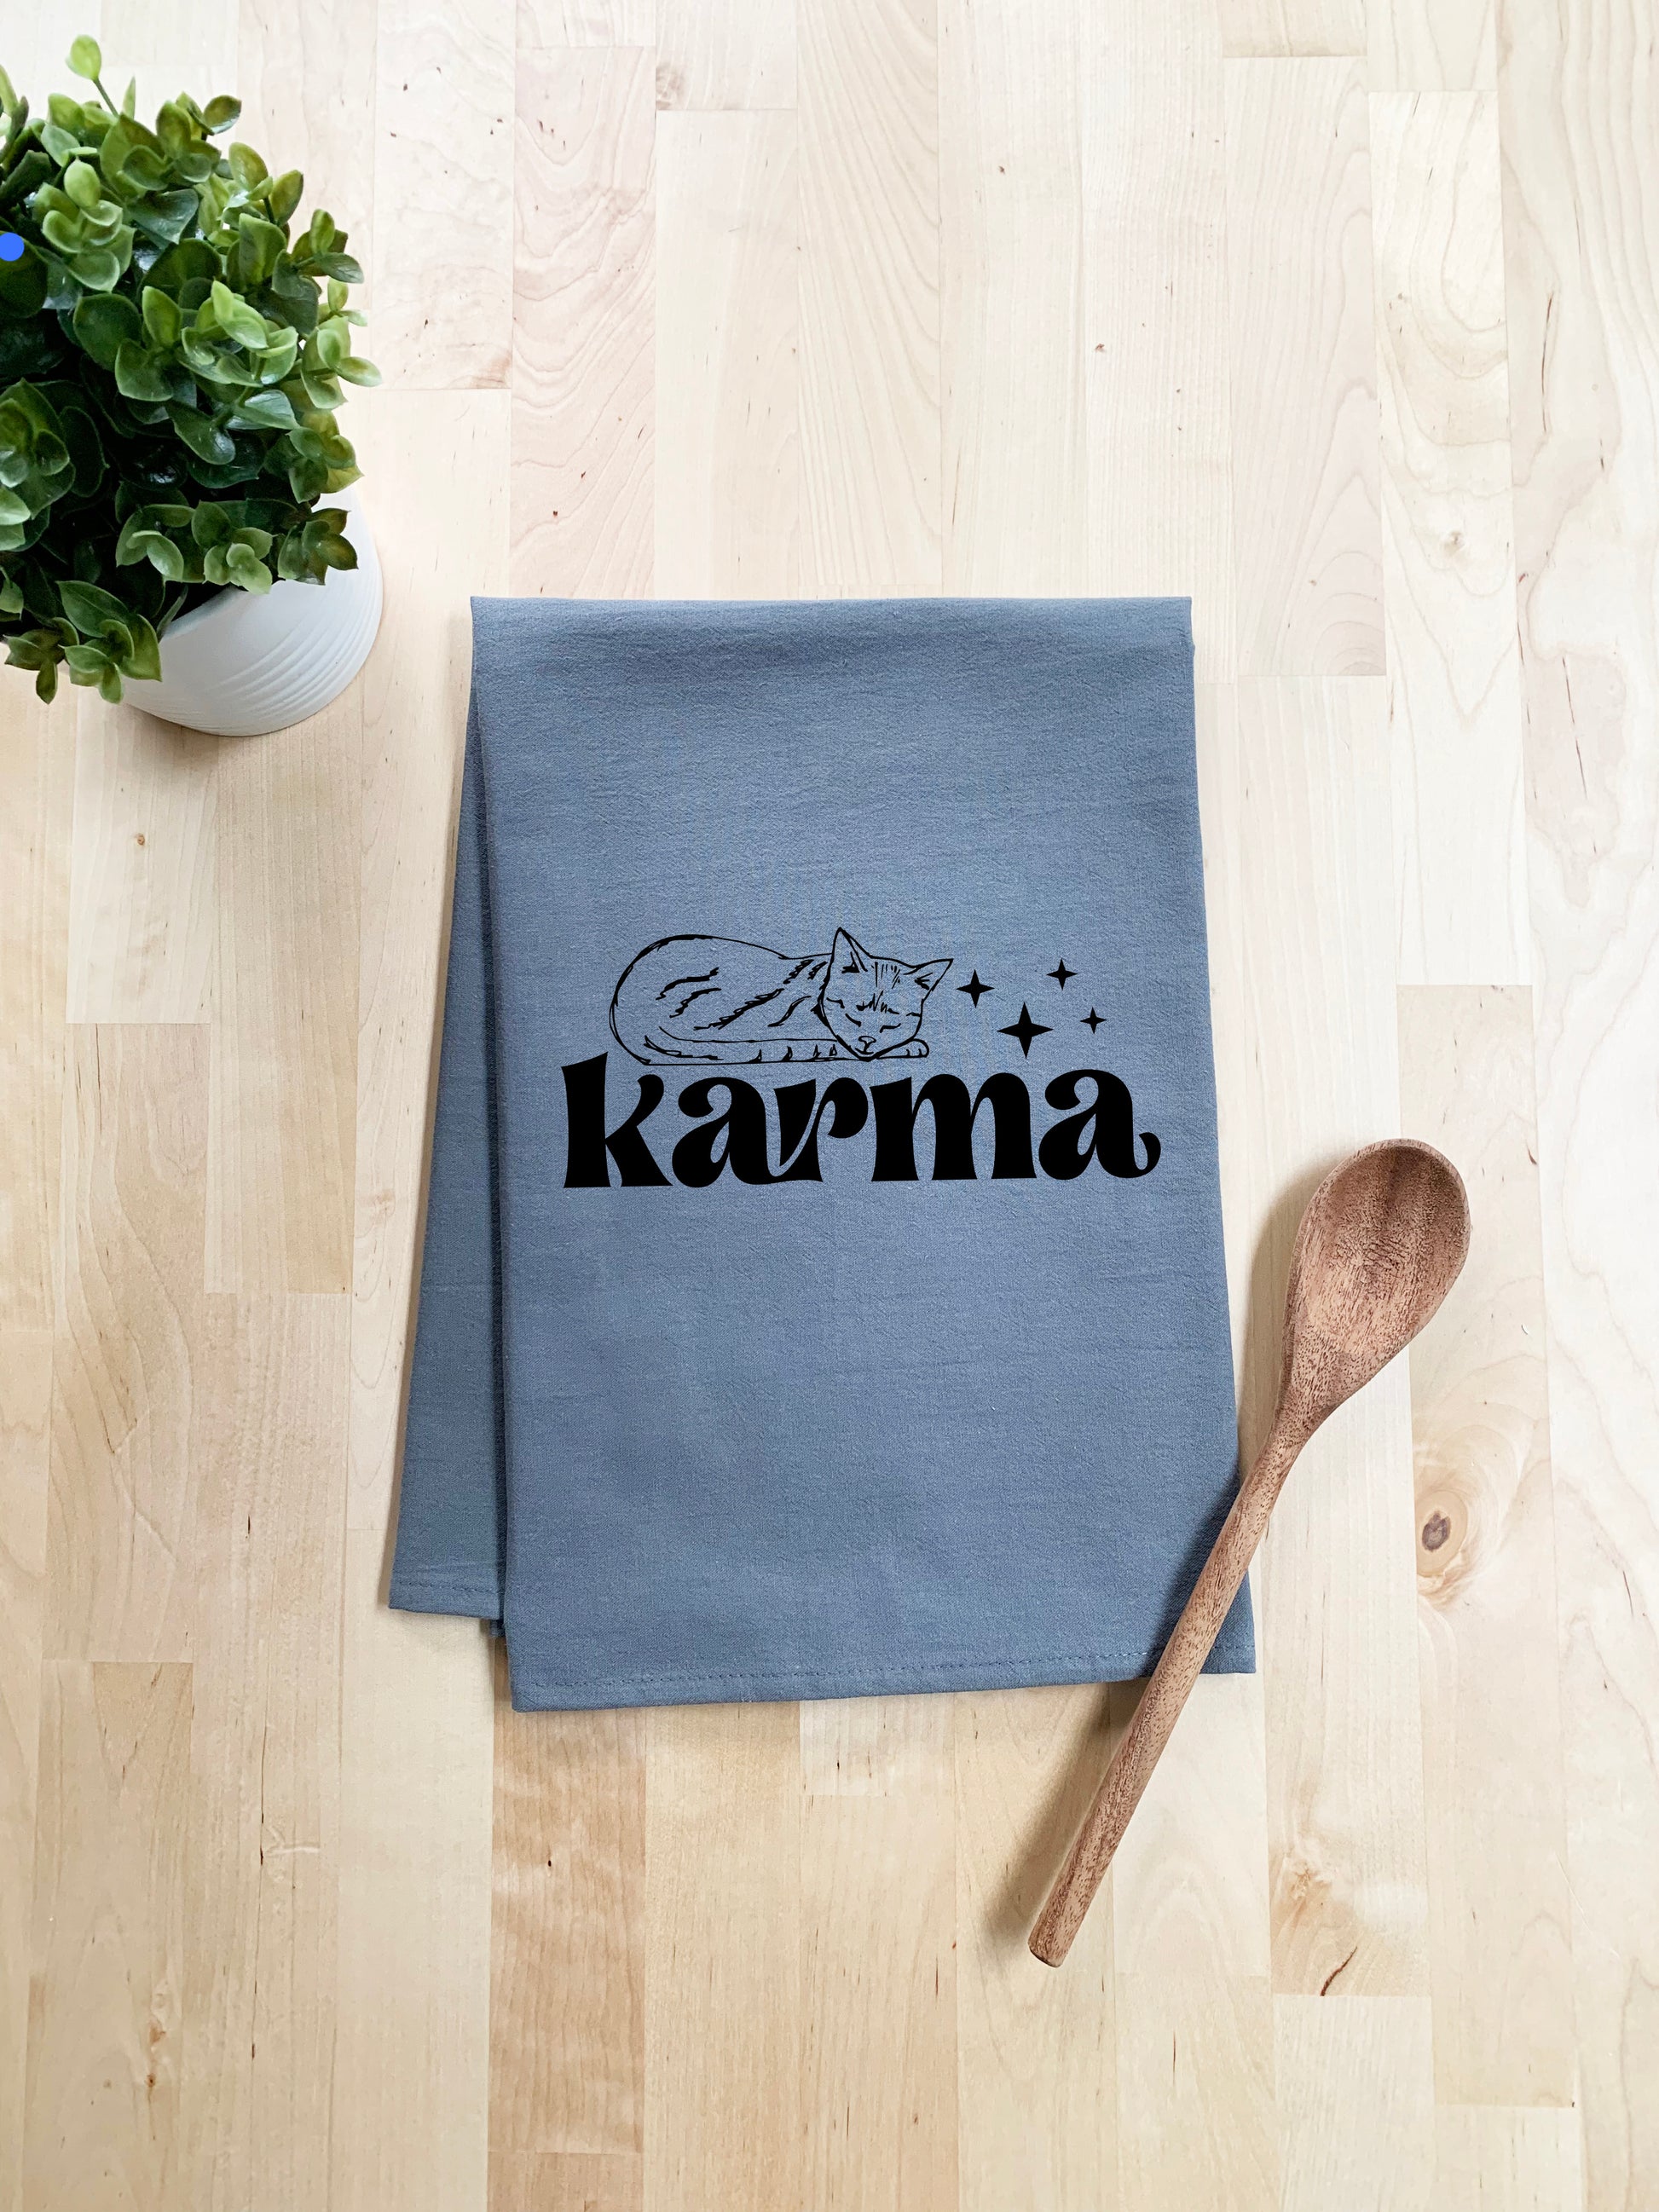 a tea towel with the word karnna on it next to a wooden spoon